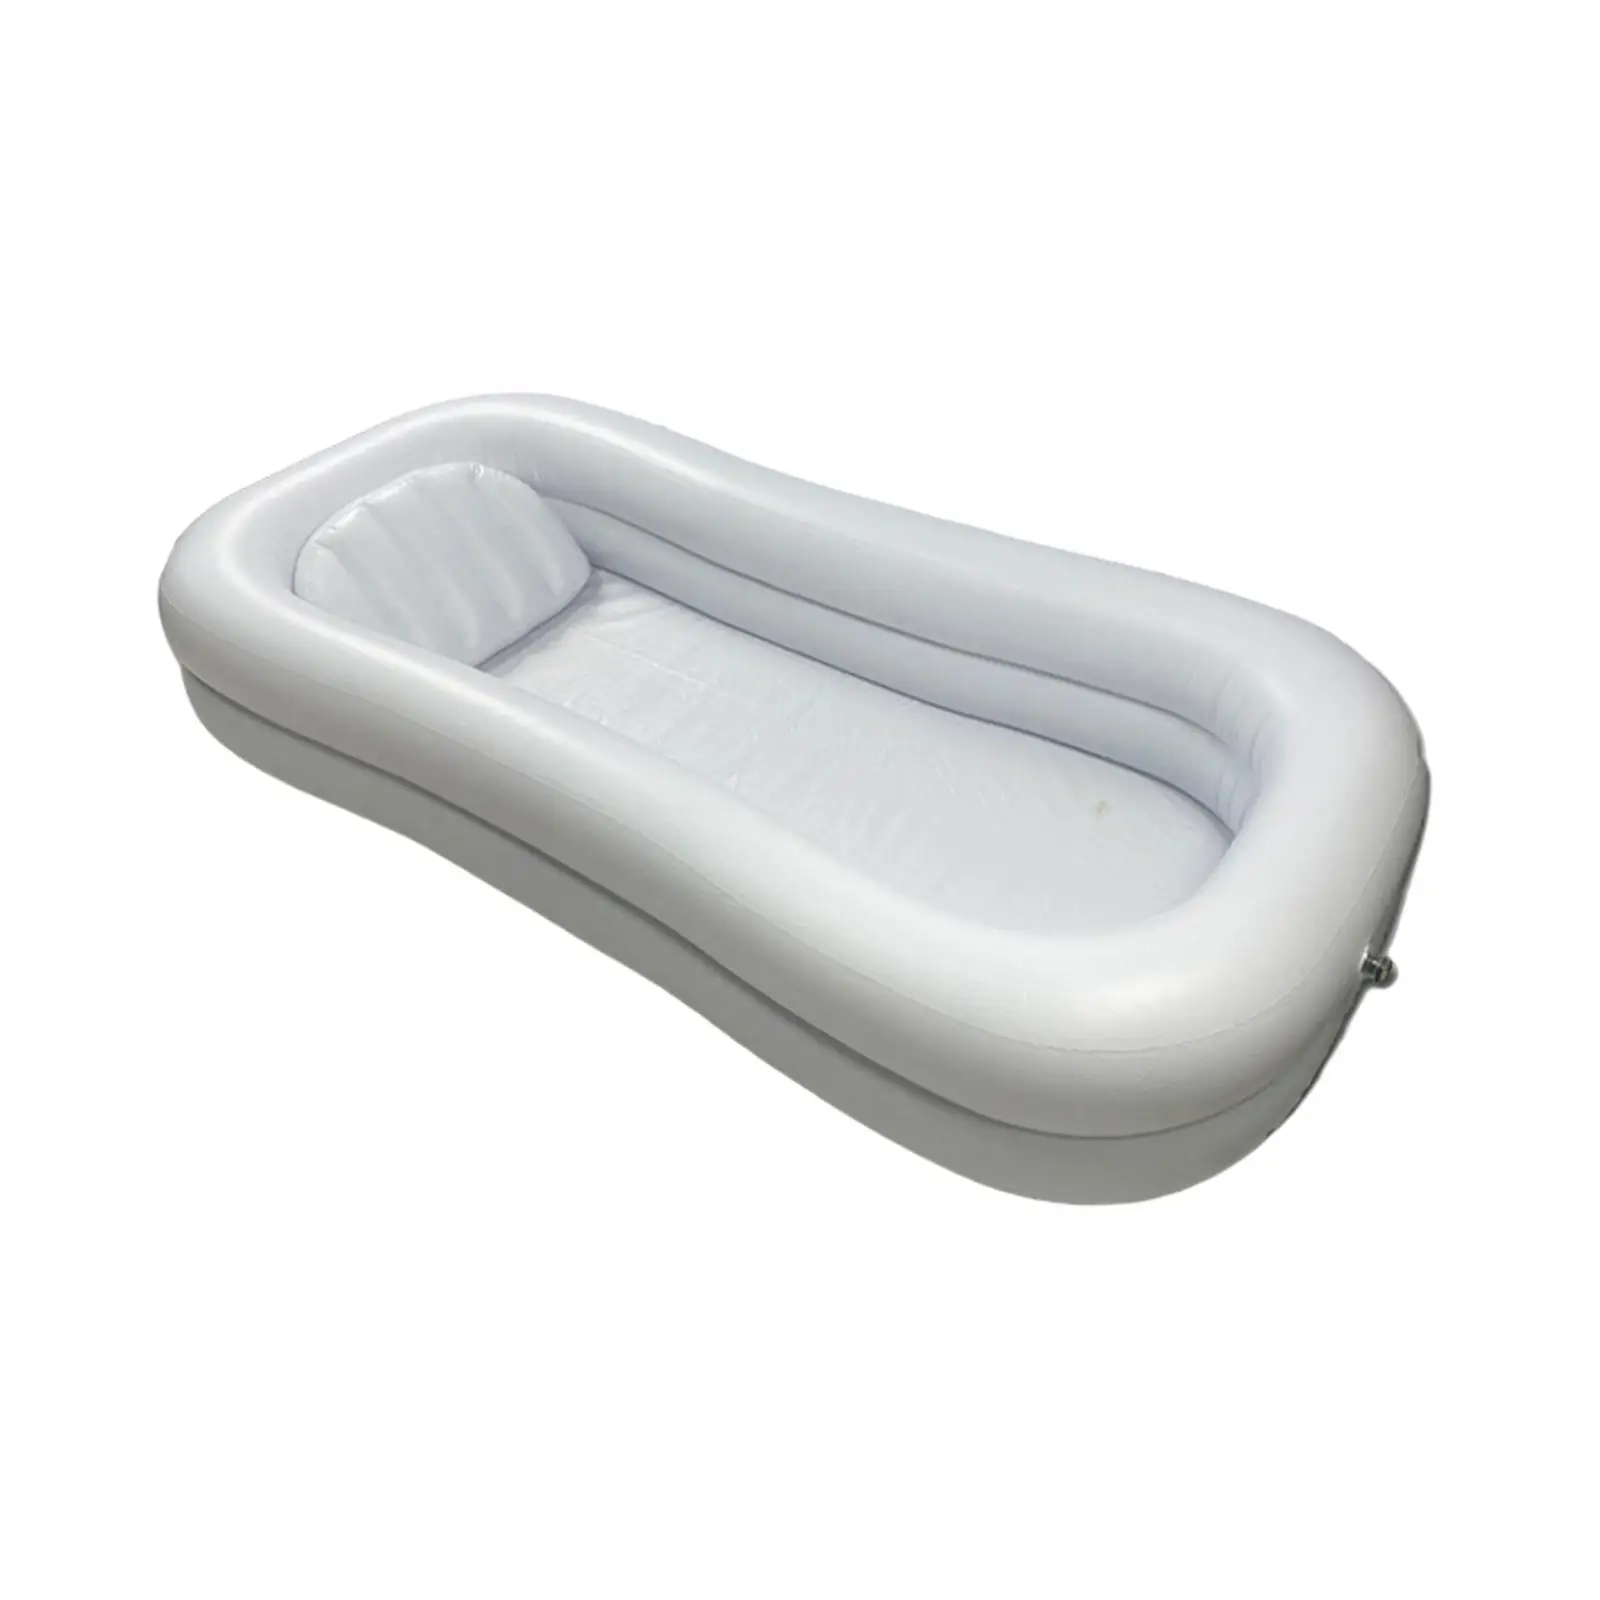 Inflatable Bathtub Adjustable Foldable Thicken Bath in Bed Assist Aid Bath Basin for Elderly Seniors Handicapped Disabled Adults